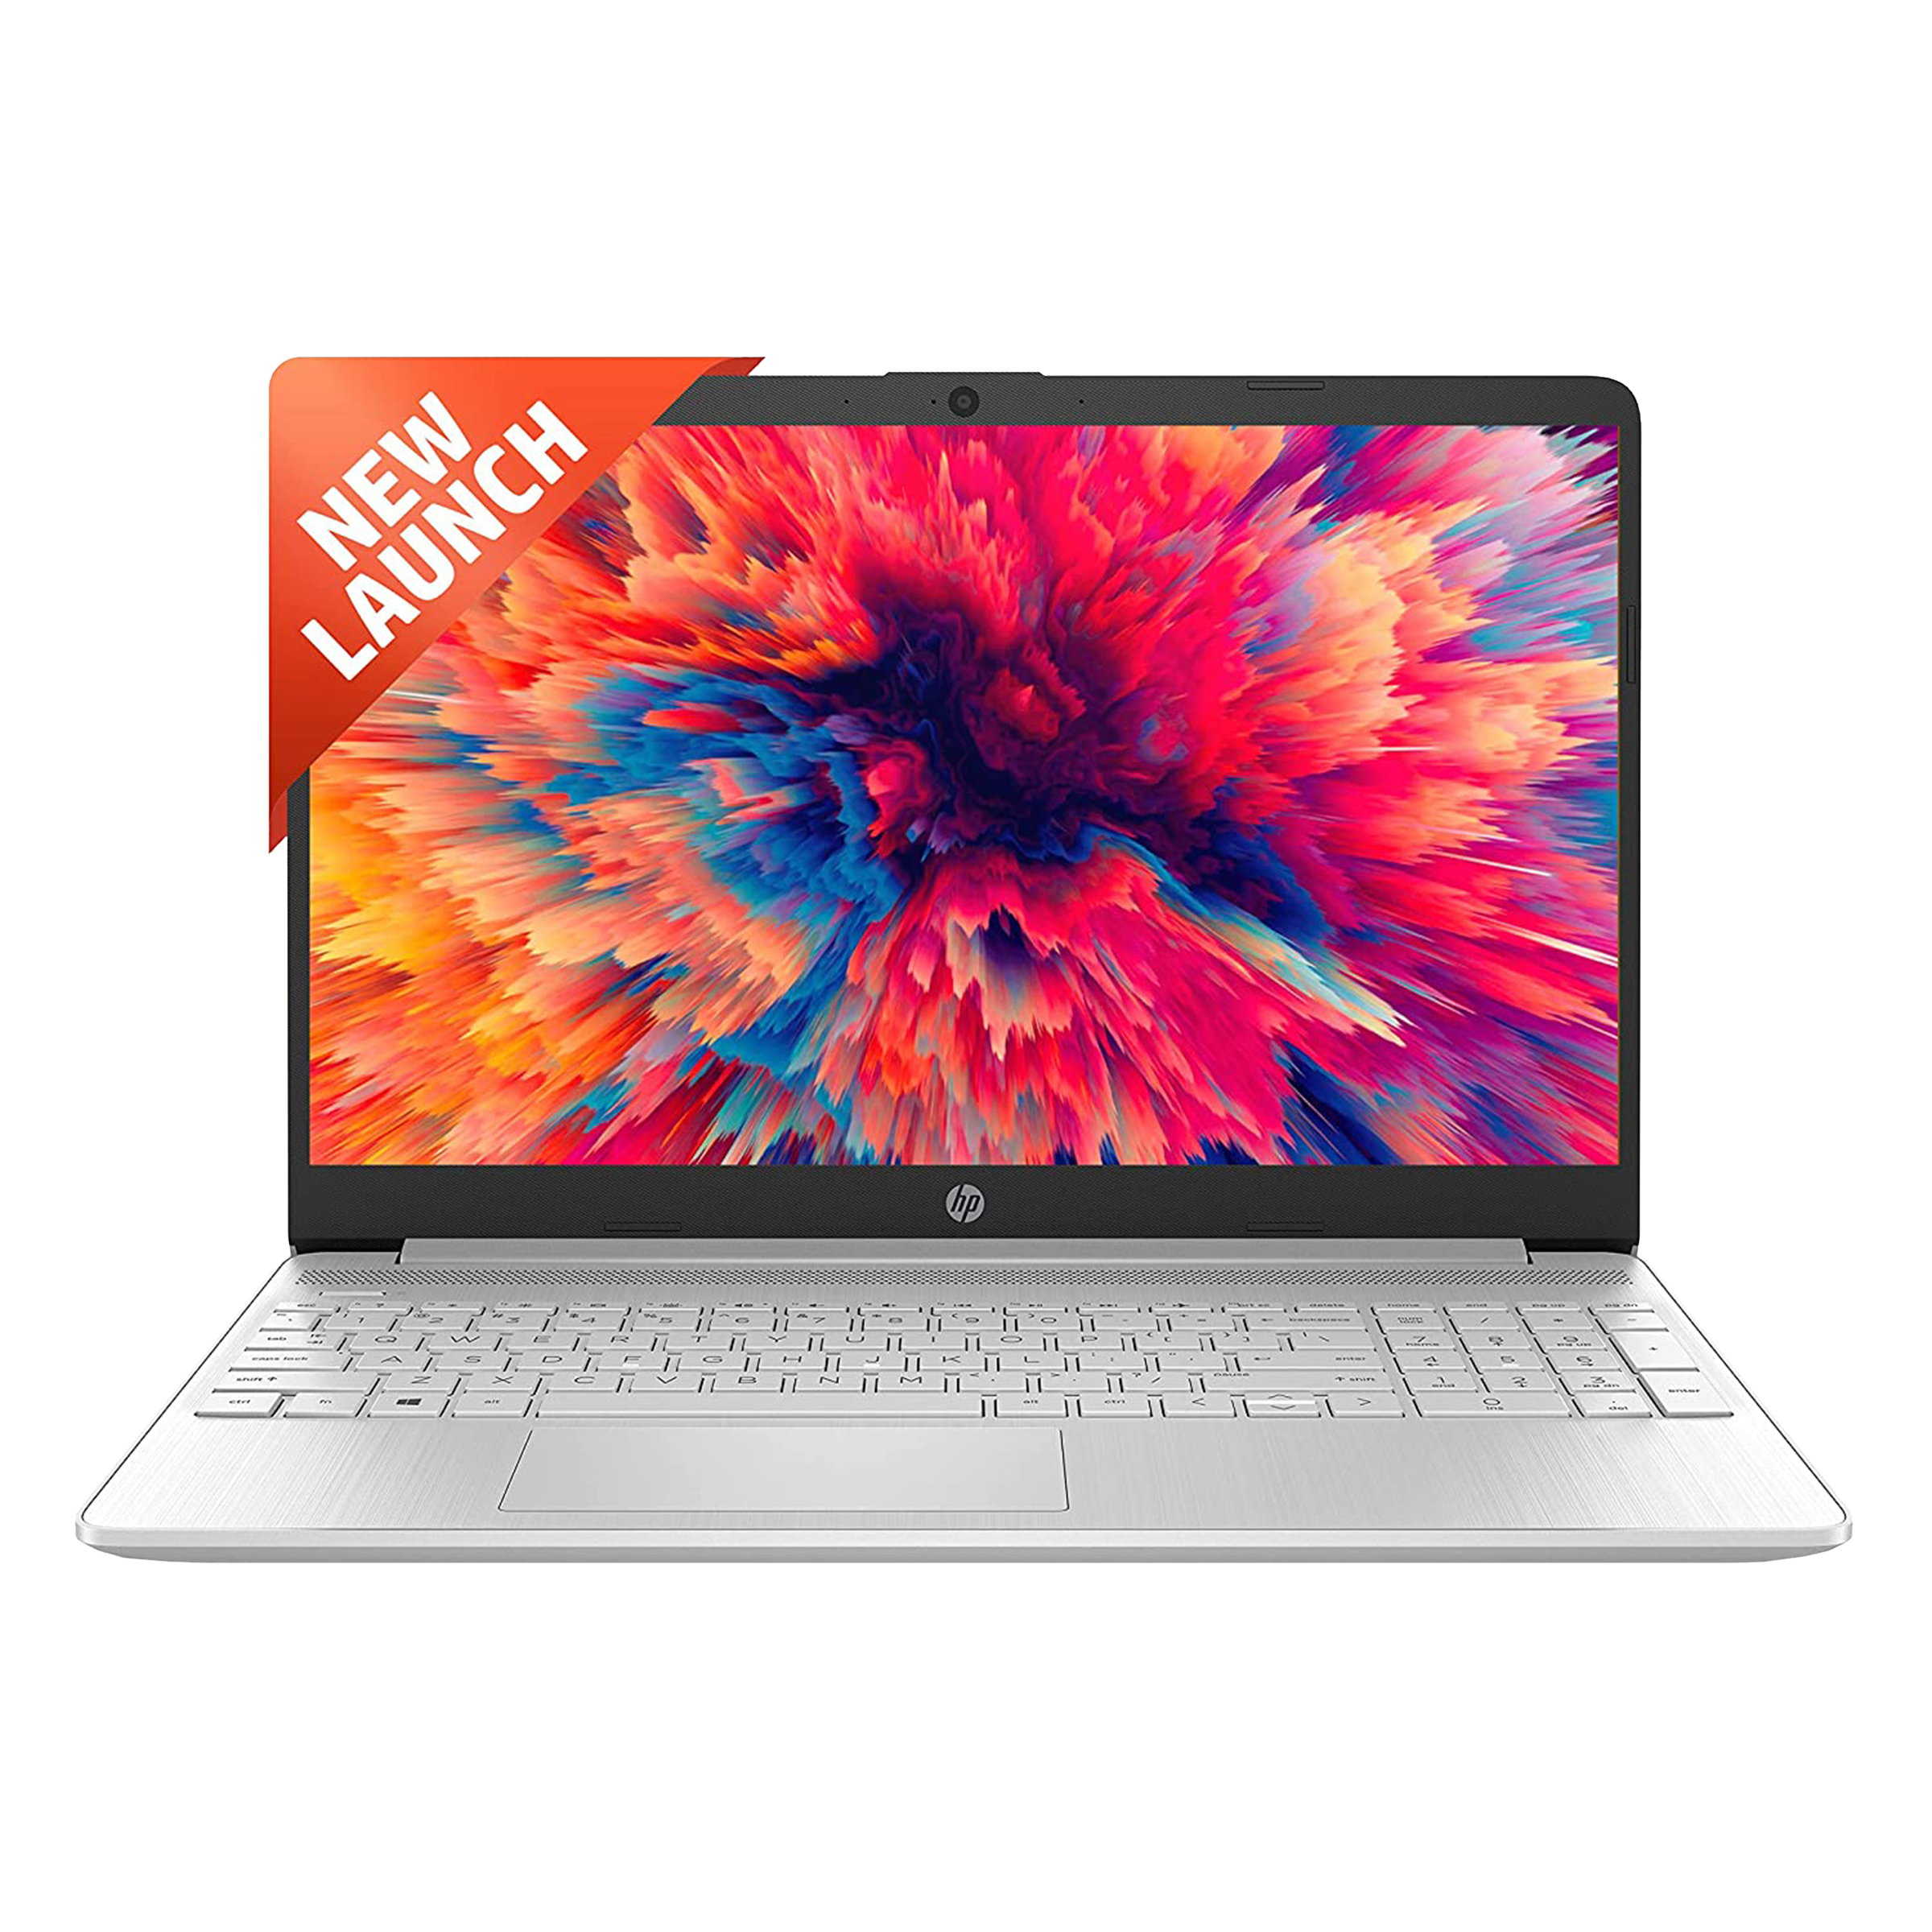 HP Intel 15s-fq5009TU Core i5 12th Gen (15.6 inch, 8GB, 512GB, Windows 11 Home, MS Office Home and Student 2021, Intel Iris Xe Graphics, Full HD IPS Display, Natural Silver, 67V52PA#ACJ)_1